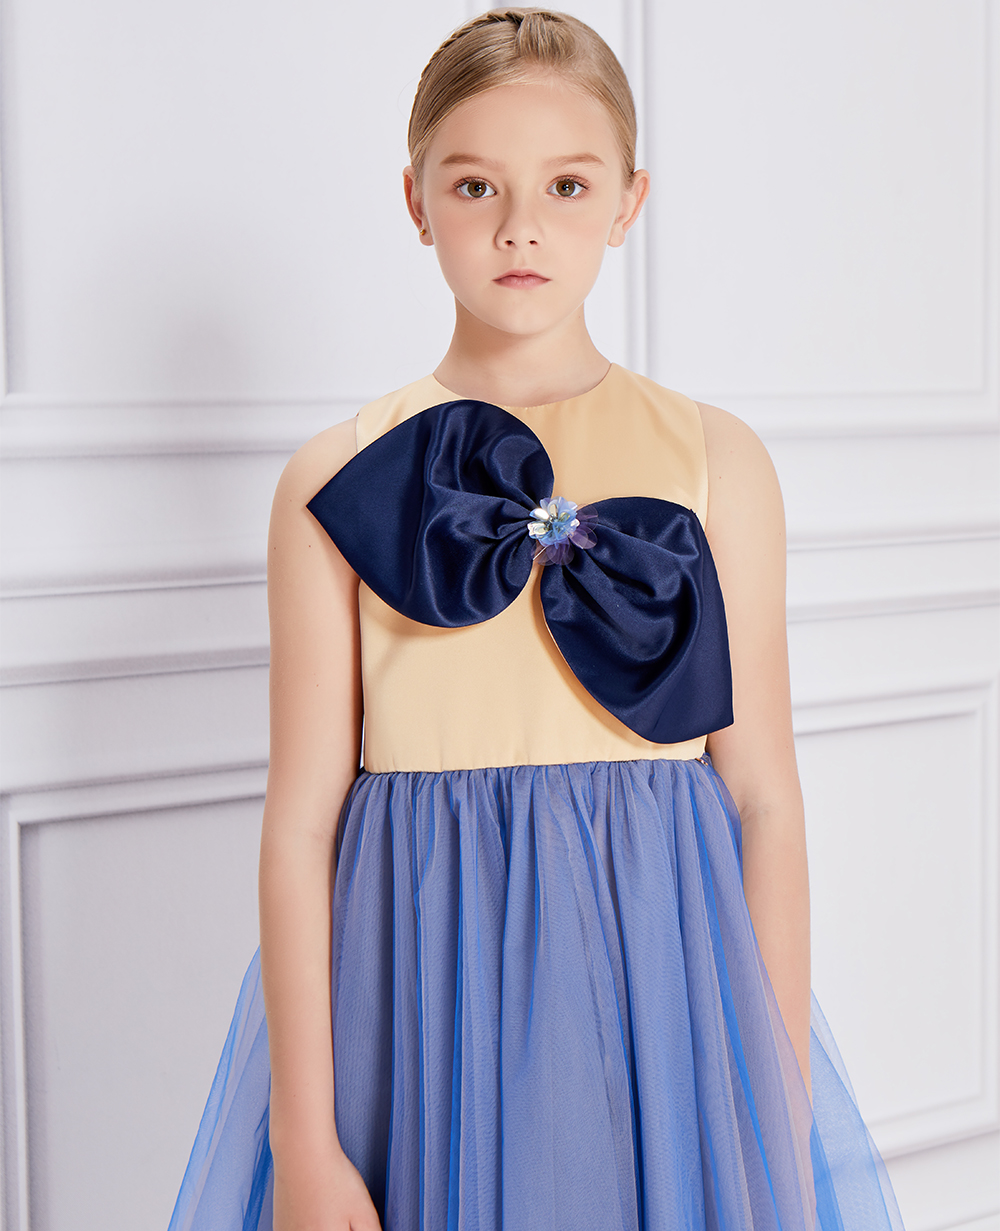 Blue Bow Tulle Dress